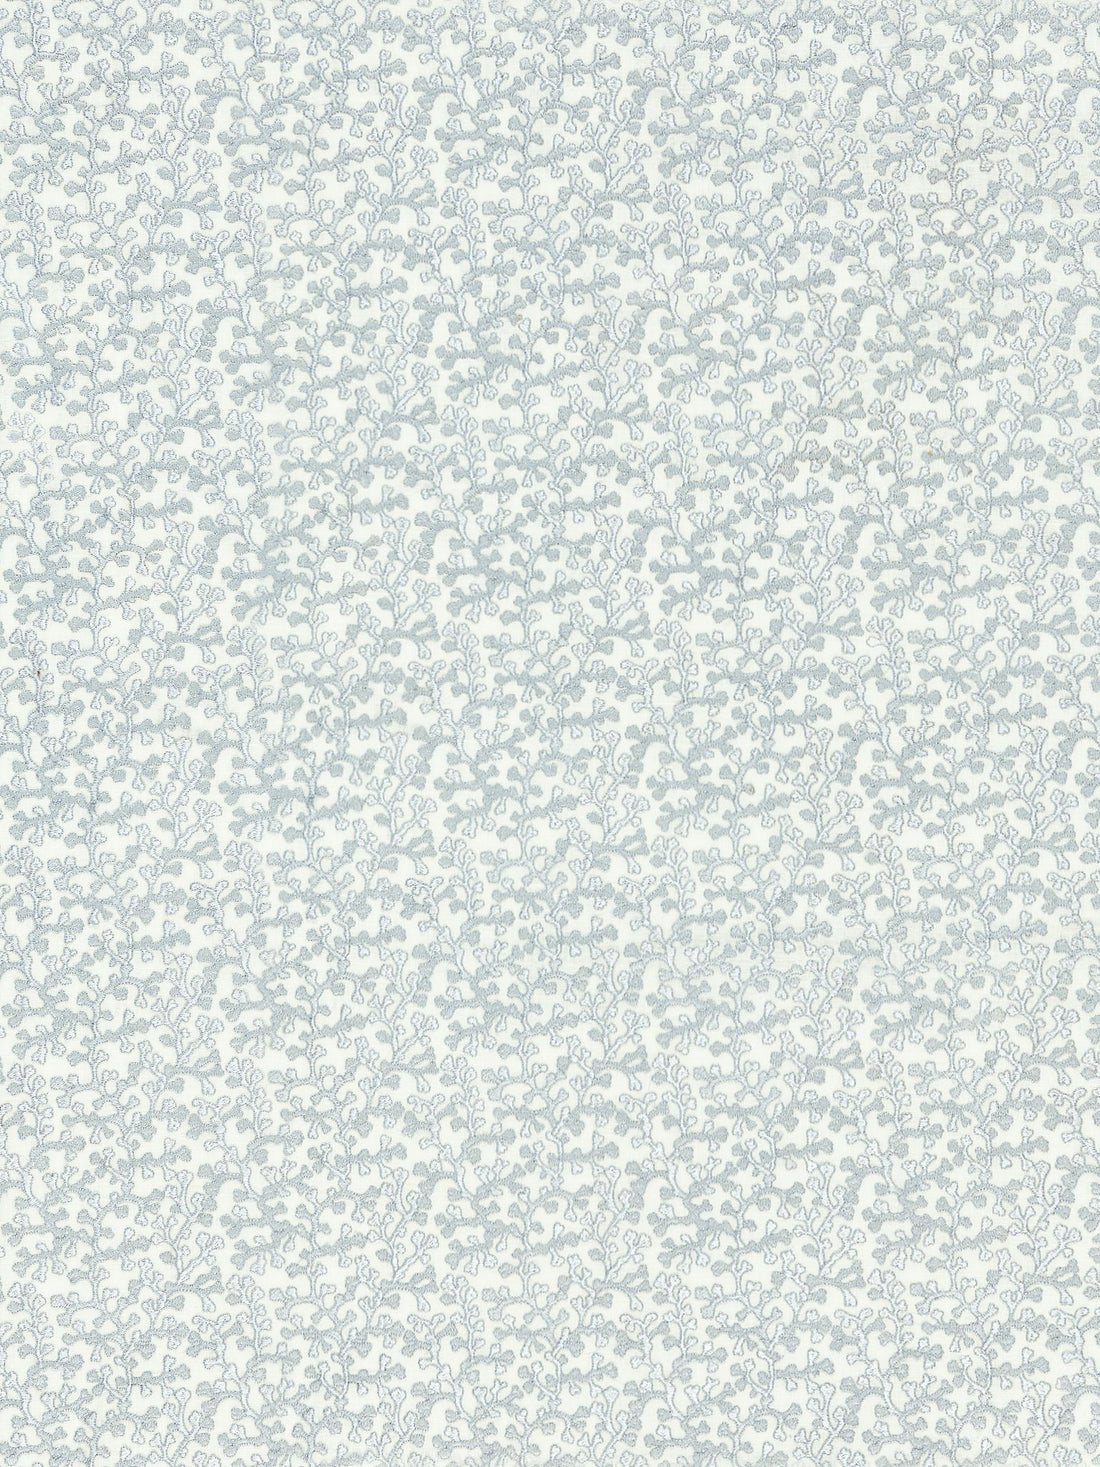 Hele Bay fabric in powder blue color - pattern number ZS 00026949 - by Scalamandre in the Old World Weavers collection